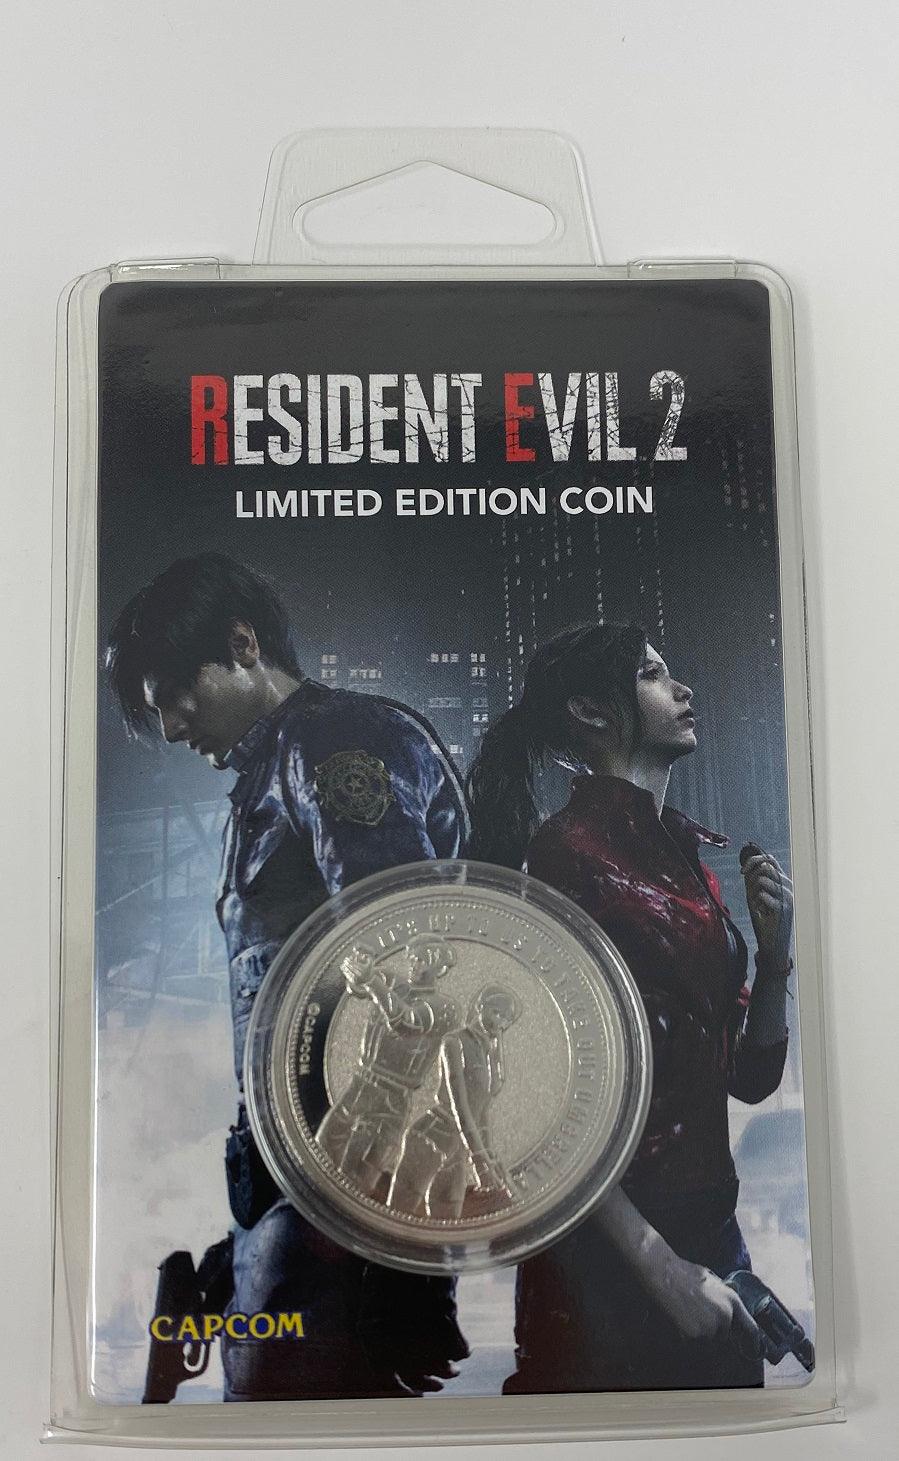 Coin Resident Evil 2 - Want a New Gadget